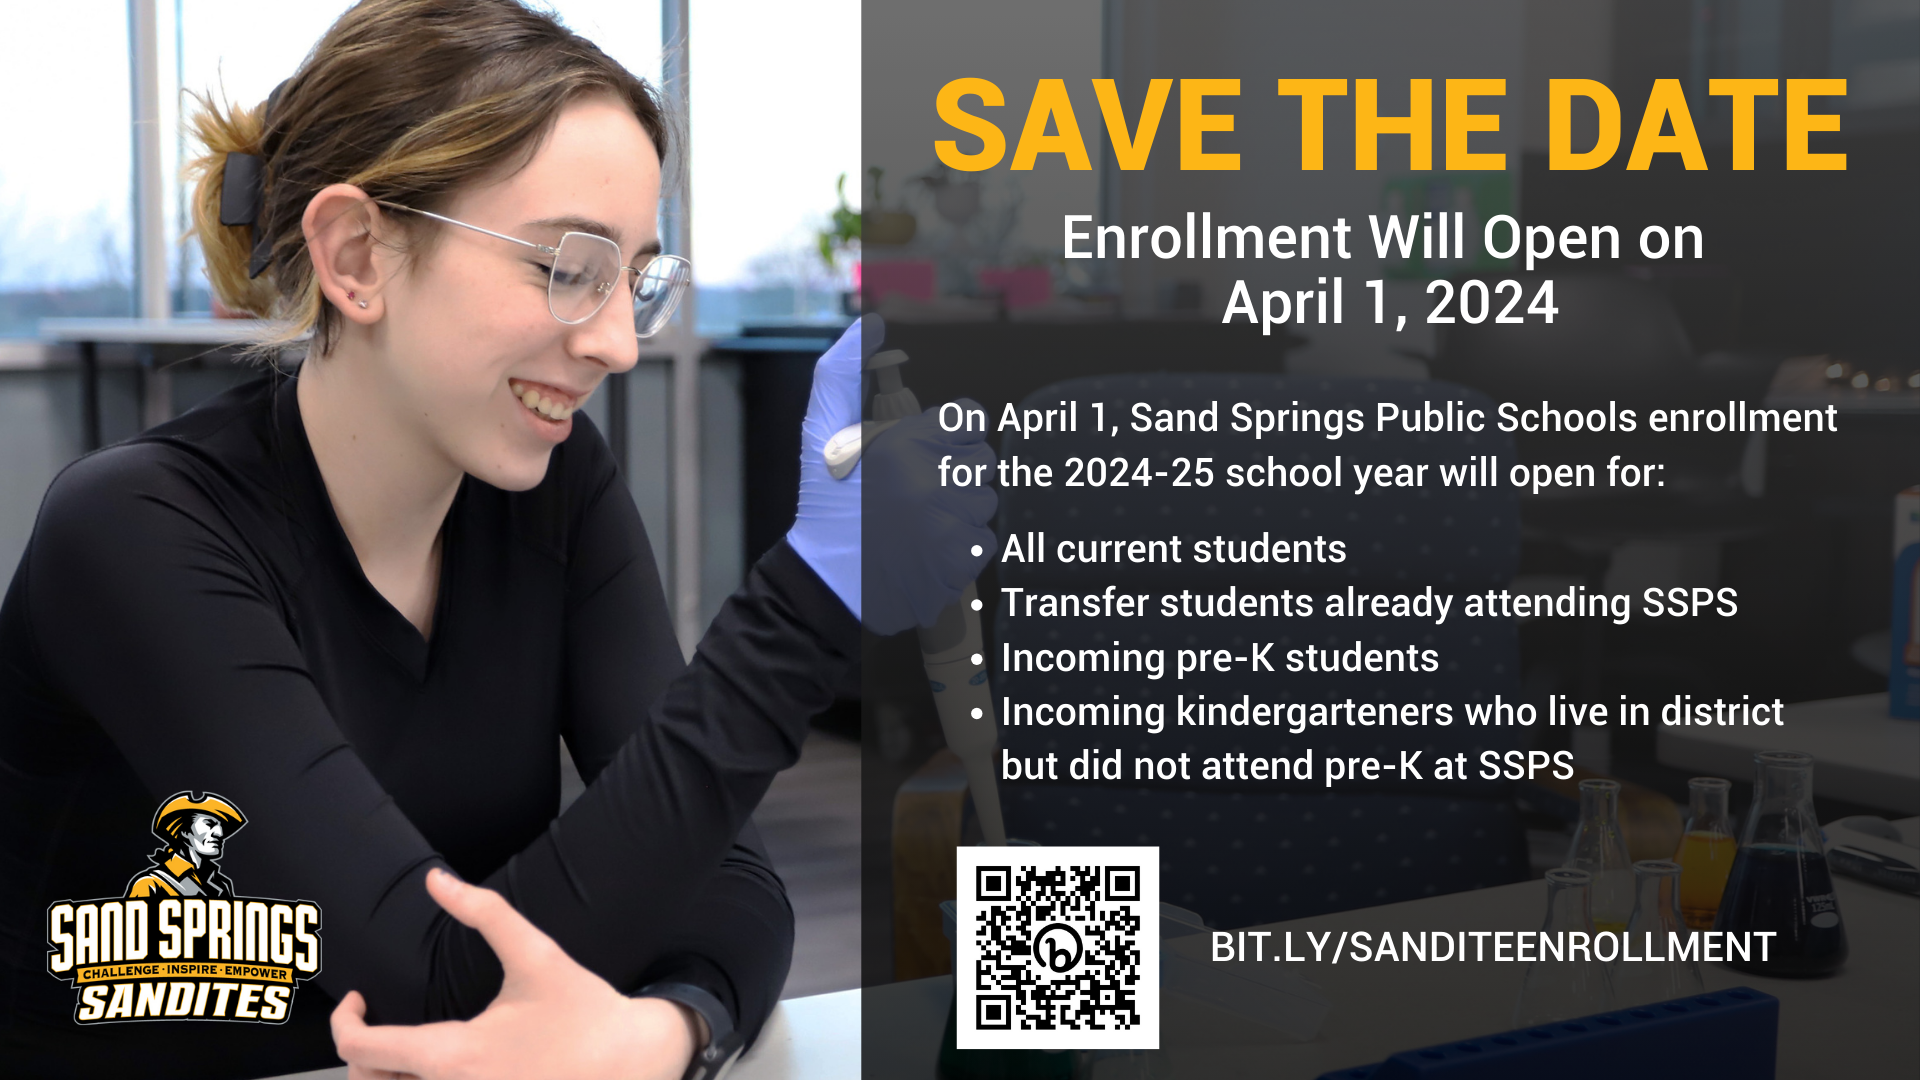 Graphic with text reading Save the Date Enrollment will open on April 1, 2024 On April 1, Sand Springs Public Schools enrollment for the 2024-25 school year will open for: All current students Transfer students already attending SSPS Incoming pre-K students Incoming kindergarteners who live in district but did not attend pre-K at SSPS bit.ly/sanditeenrollment